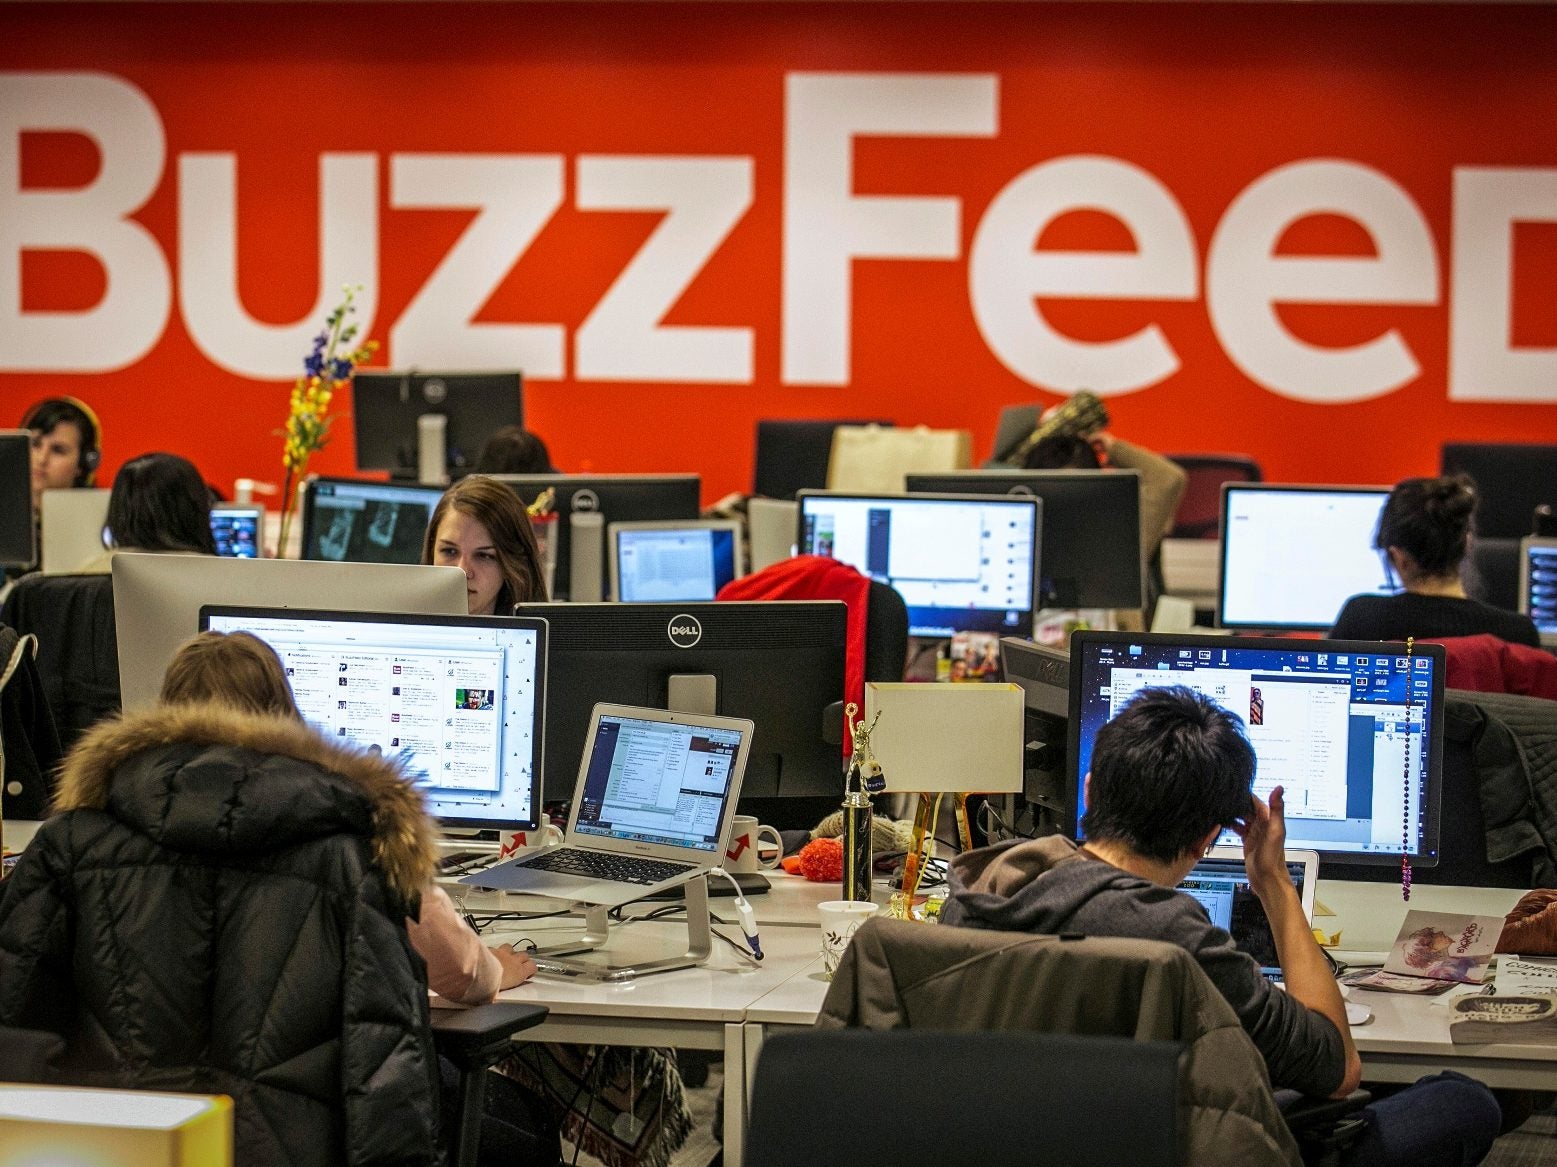 Buzzfeed UK staff announce departures from news website weeks after cuts to workforce revealed